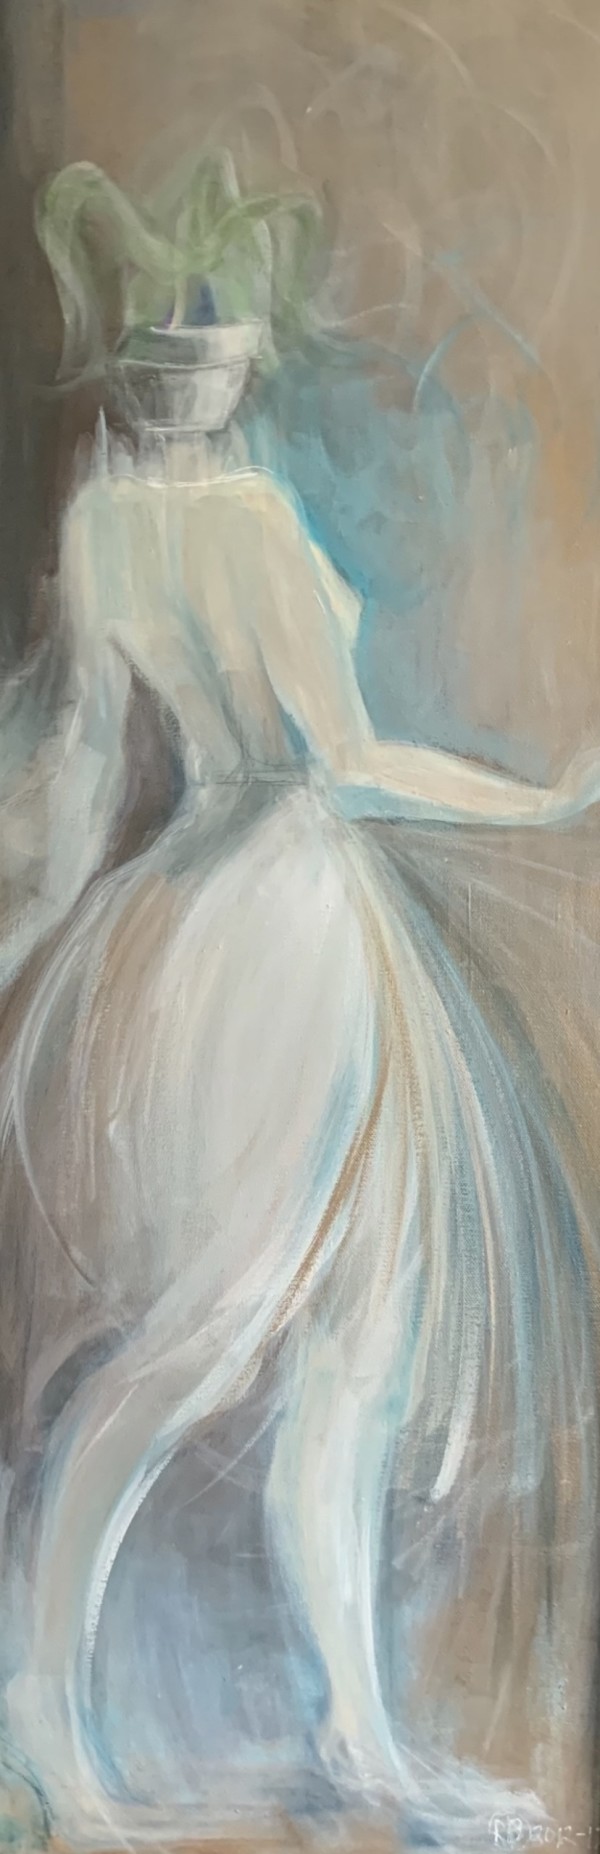 walking in conciousness  acrylic  12x30' 2012 by Renee brown